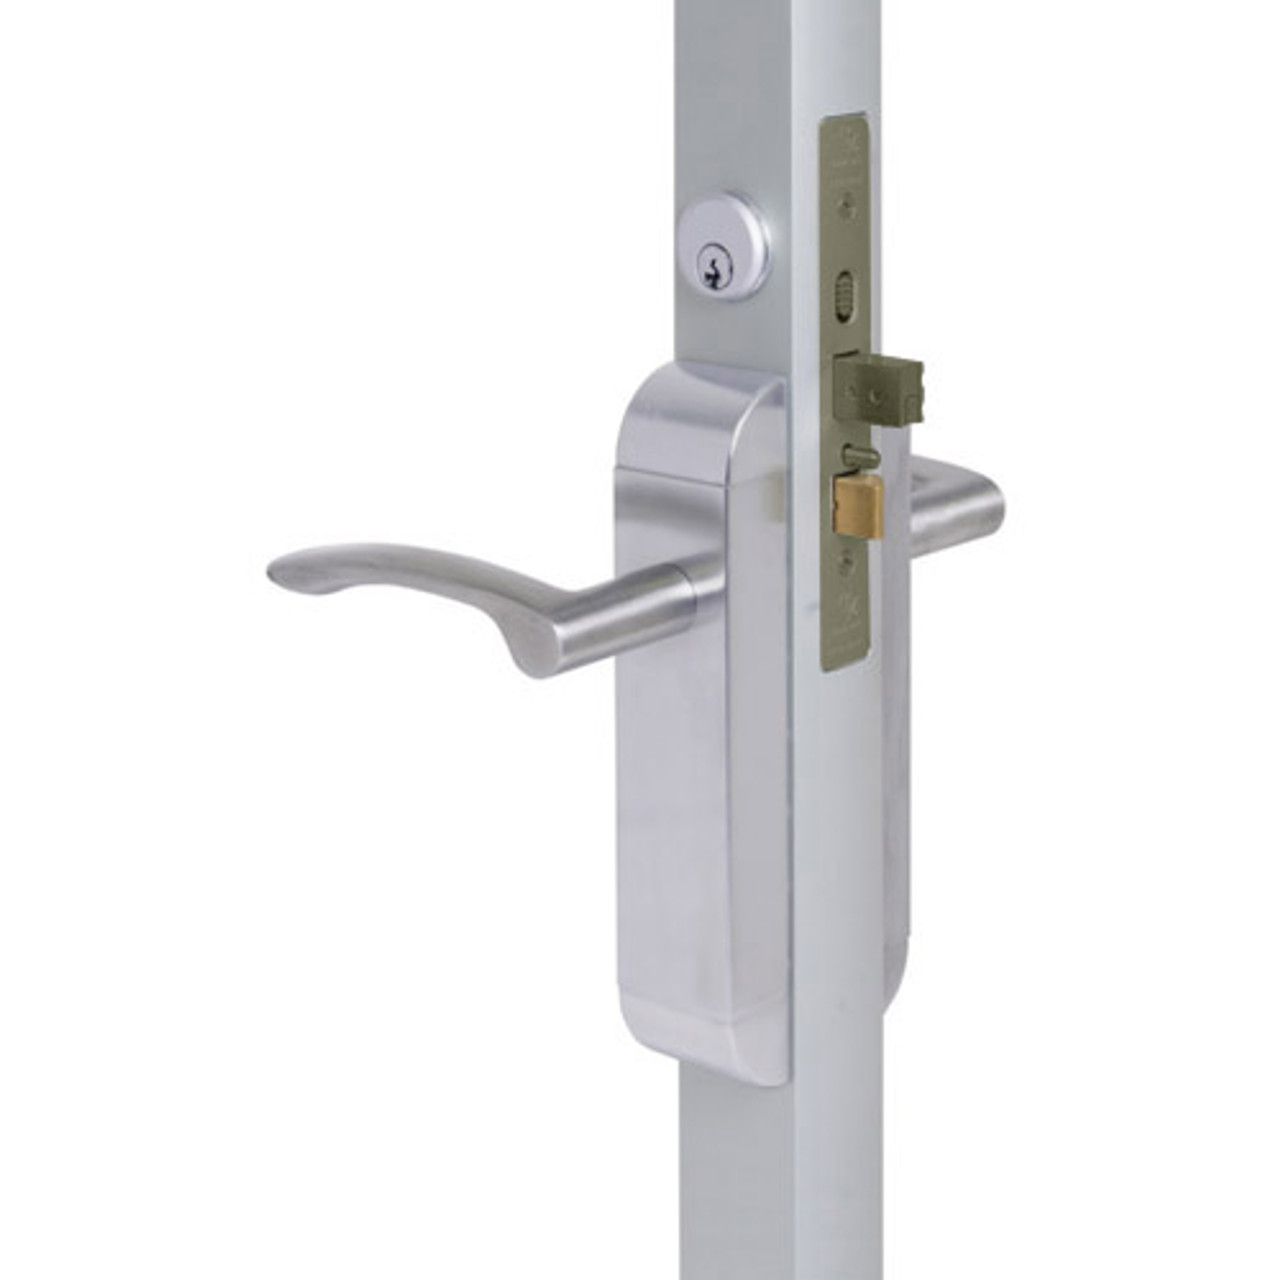 2290-312-202-32 Adams Rite Dual Force Interconnected 2290 series Deadlock/Deadlatch in Bright Stainless